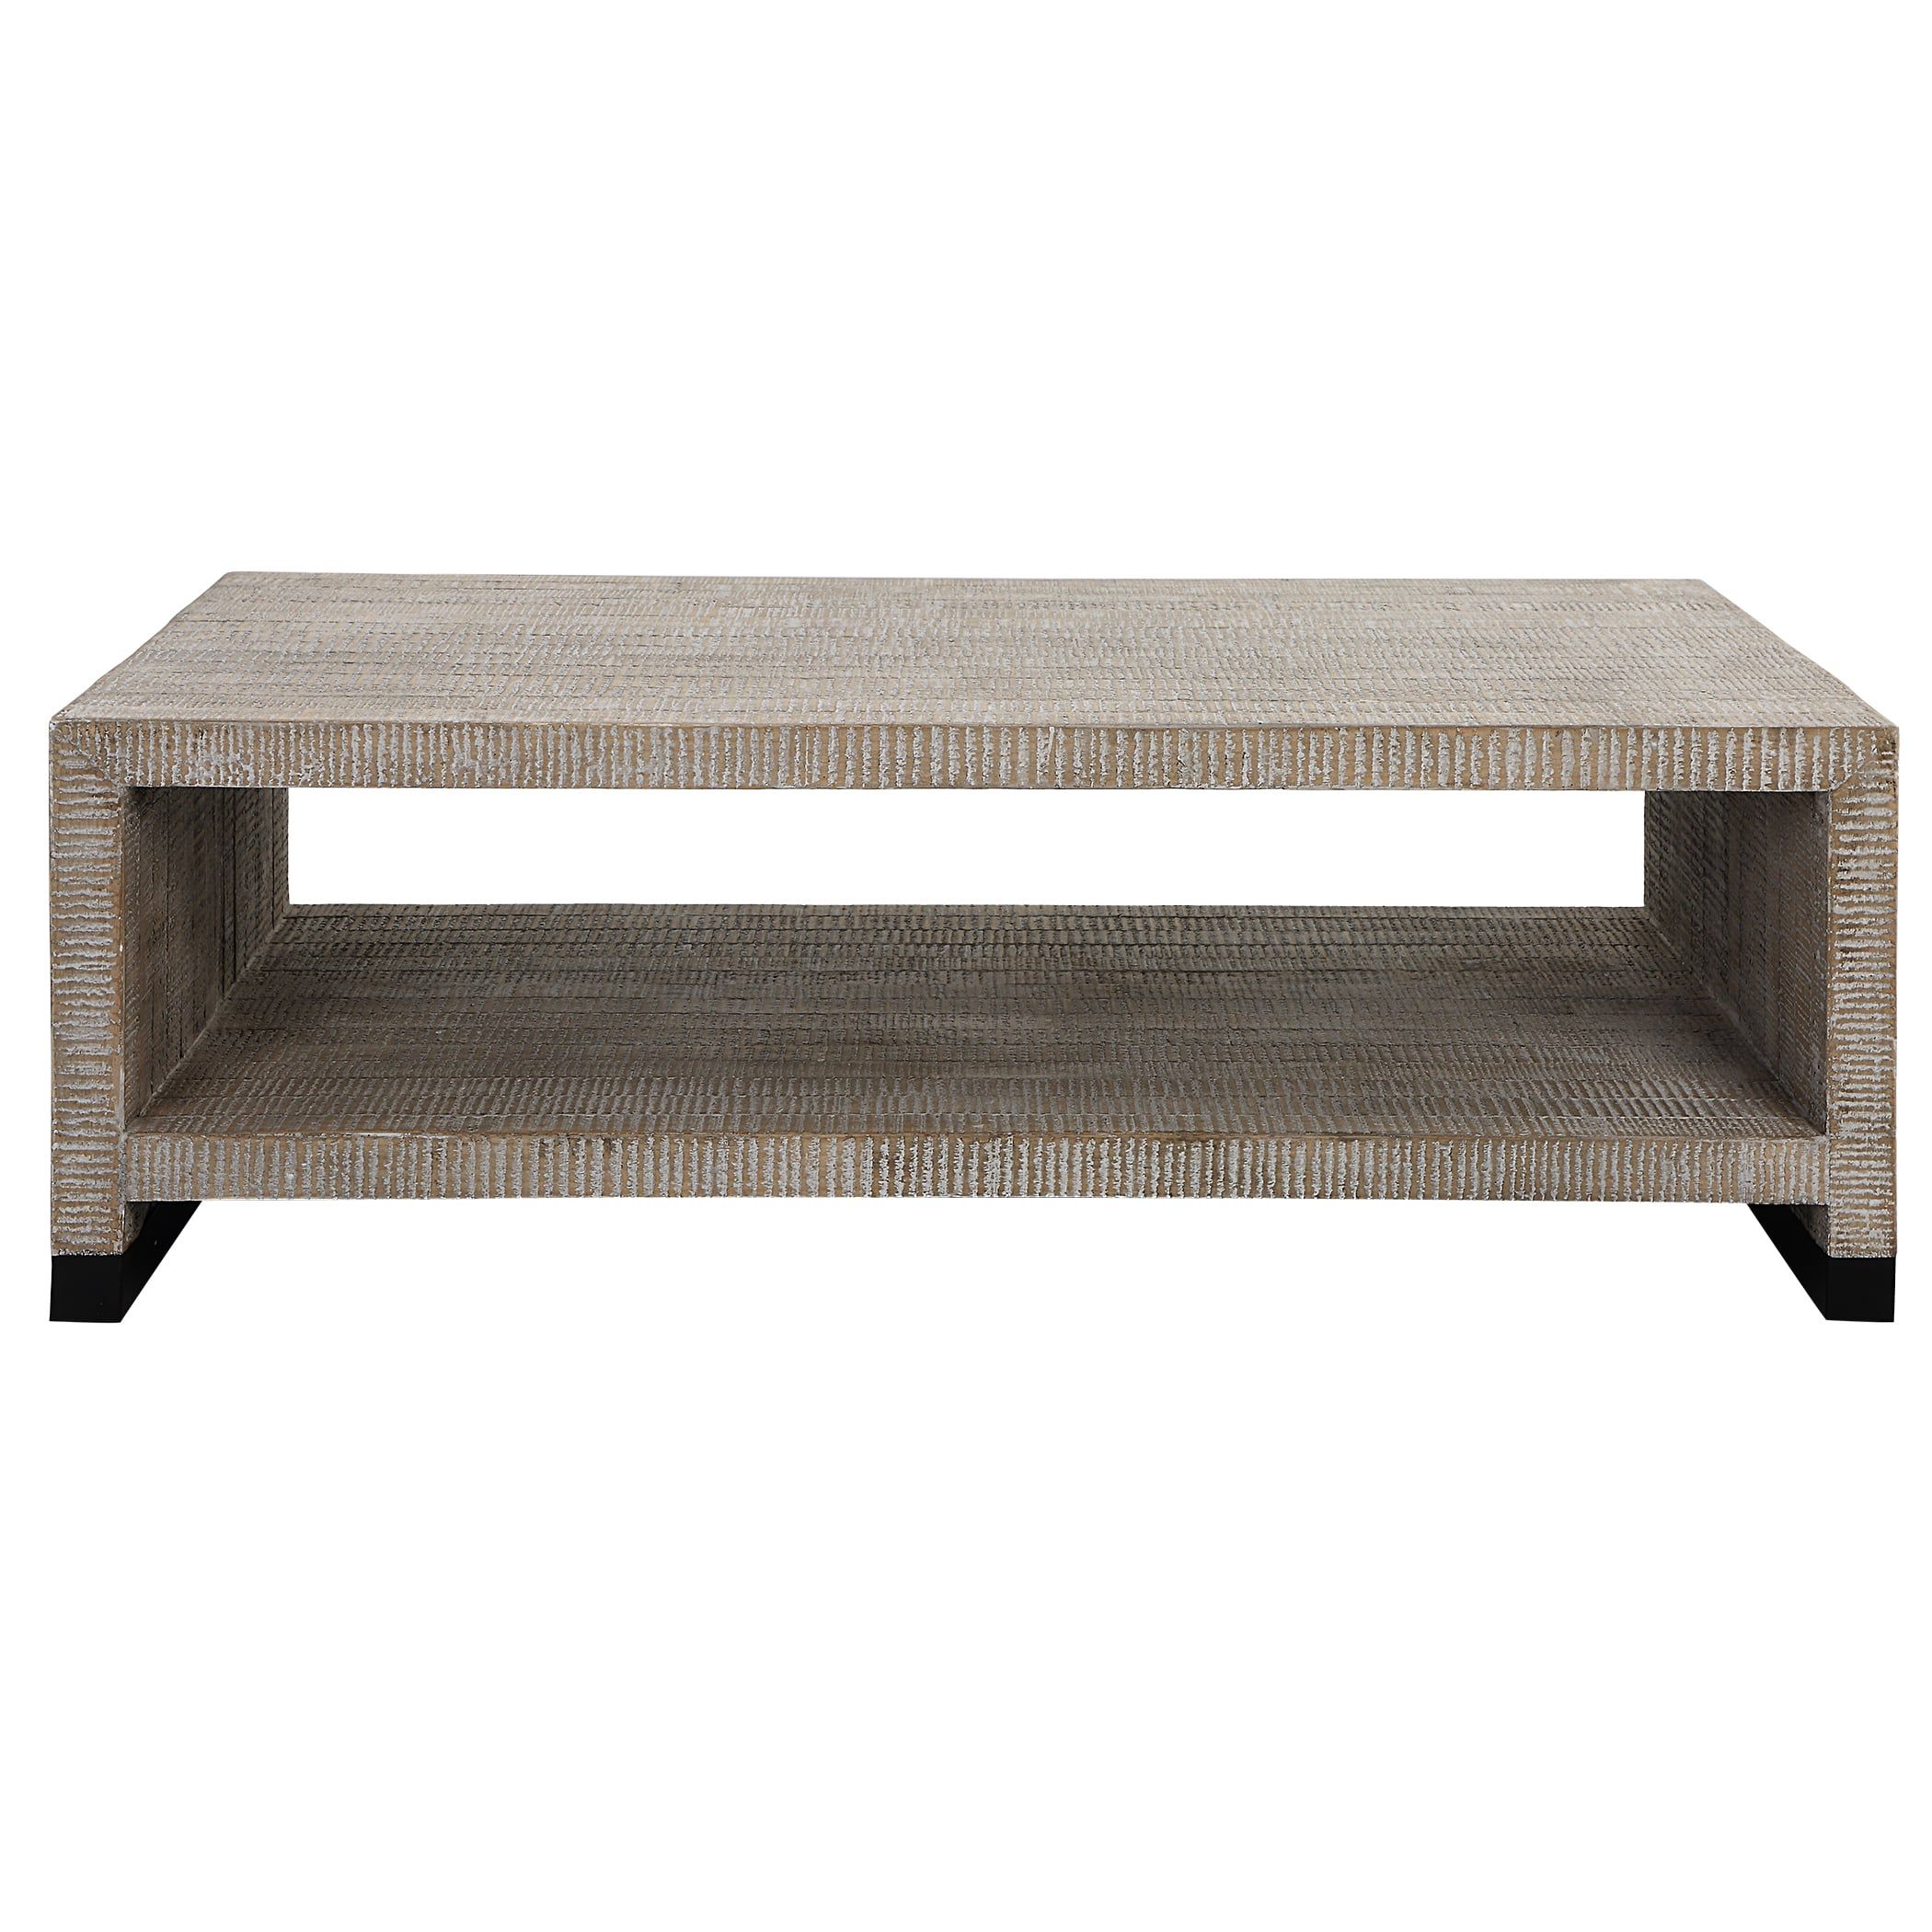 Uttermost Bosk Rustic White Washed Coffee Table With Open Shelving With Regard To Coffee Tables With Open Storage Shelves (Gallery 7 of 20)